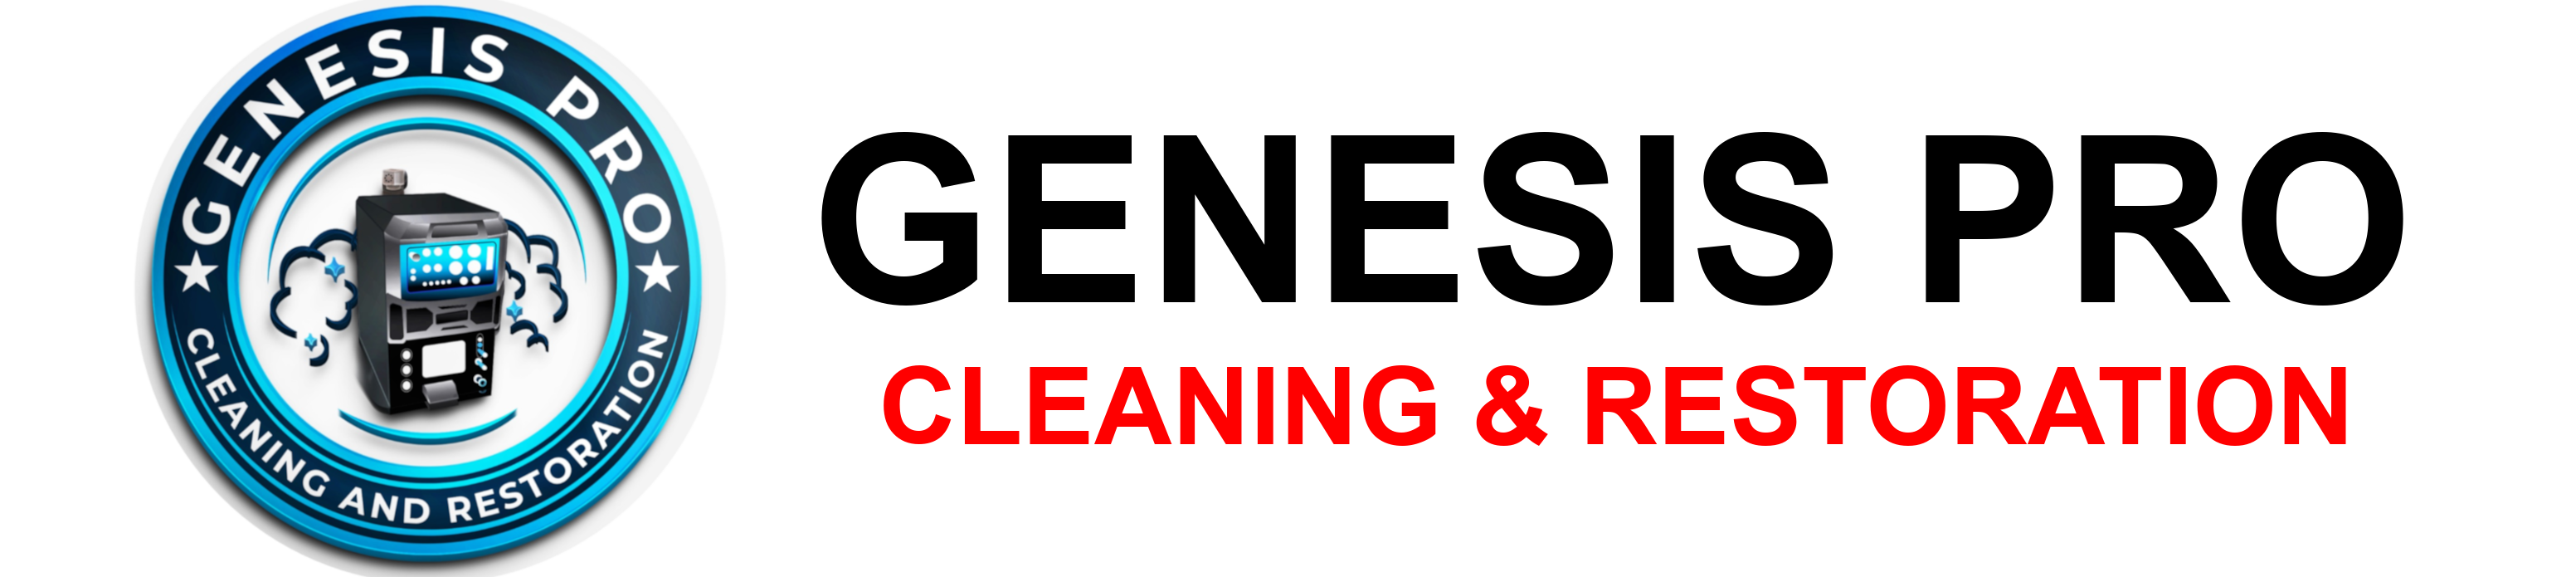 Genesis Pro Cleaning & Resoration Services